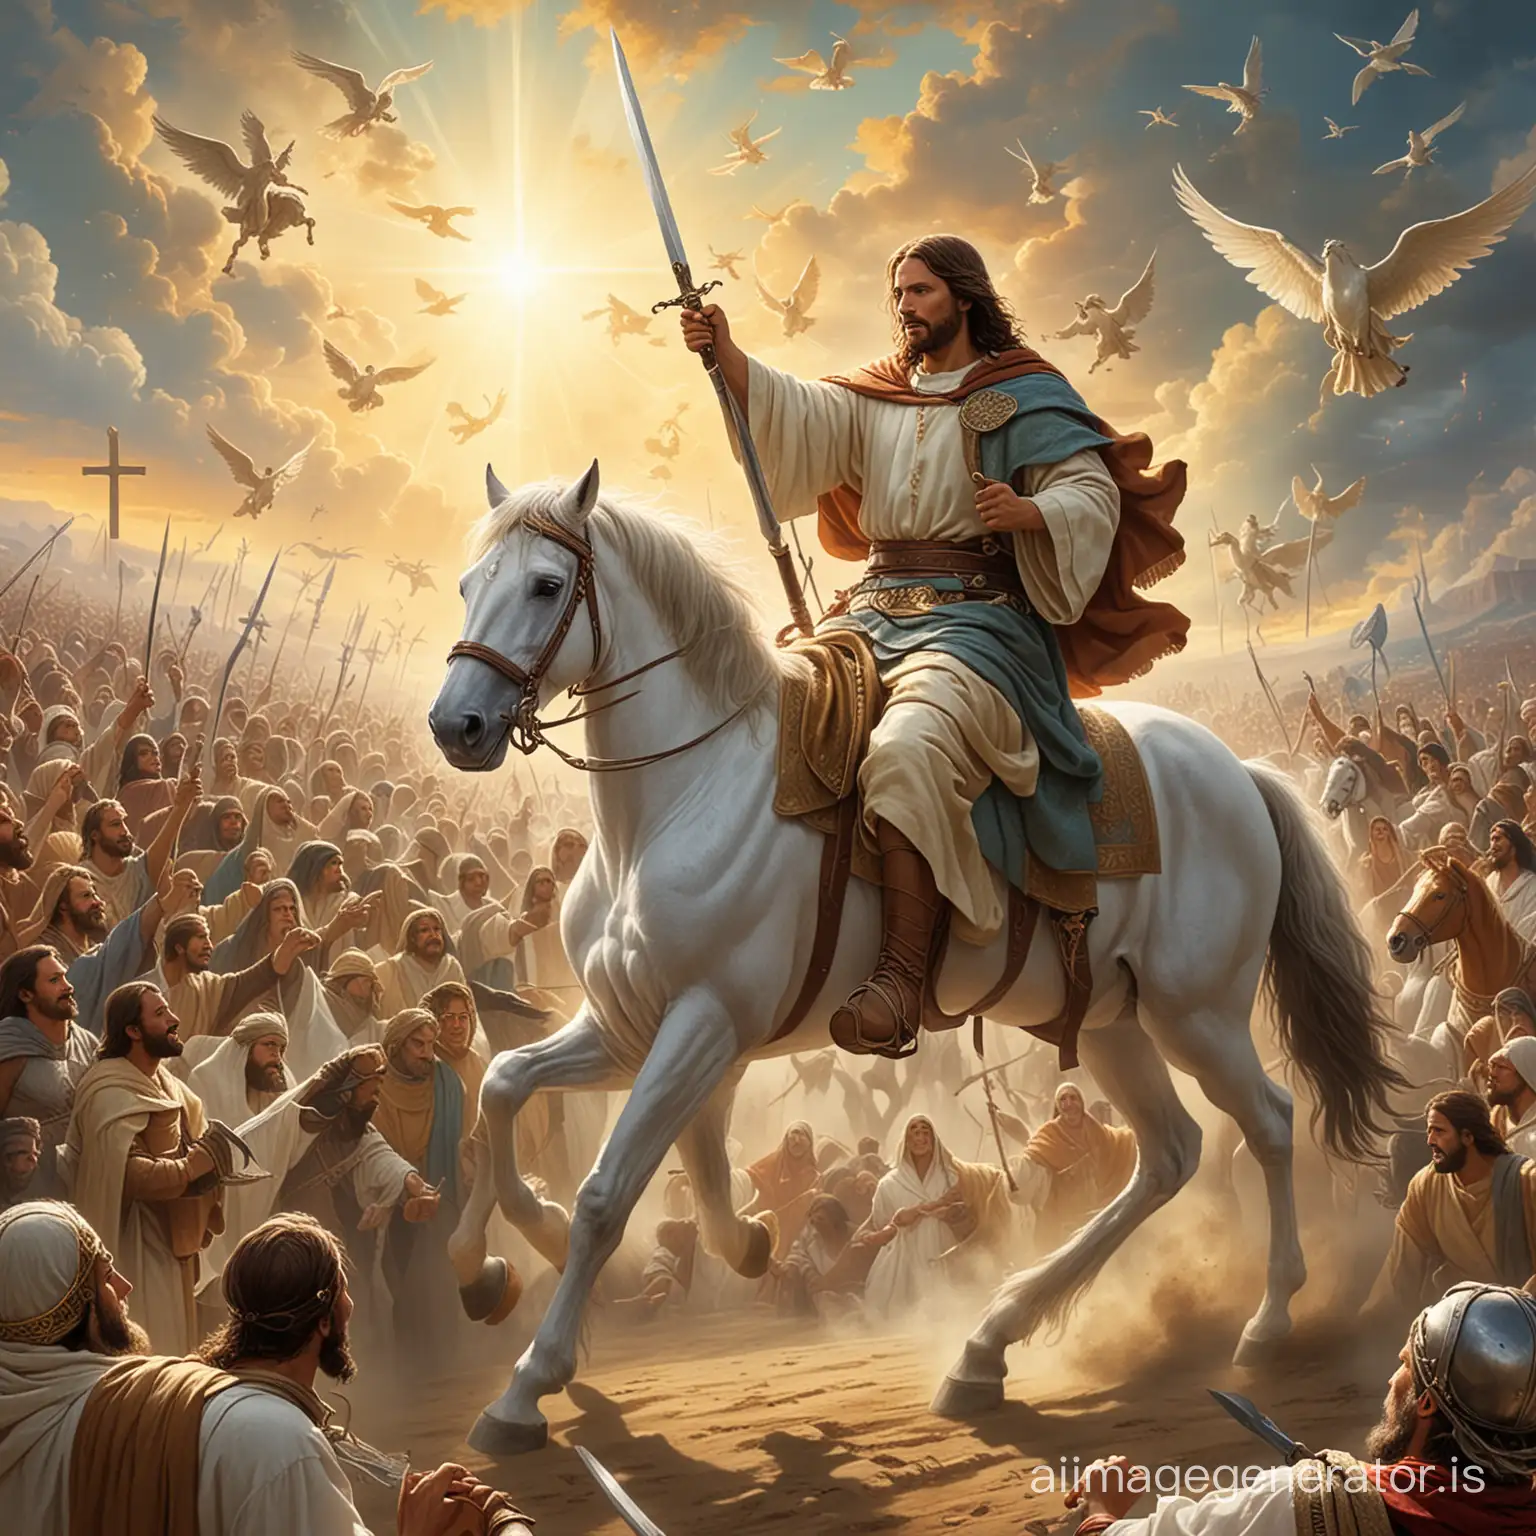 Jesus-Riding-on-Horse-in-Heavenly-Gathering-with-Sword